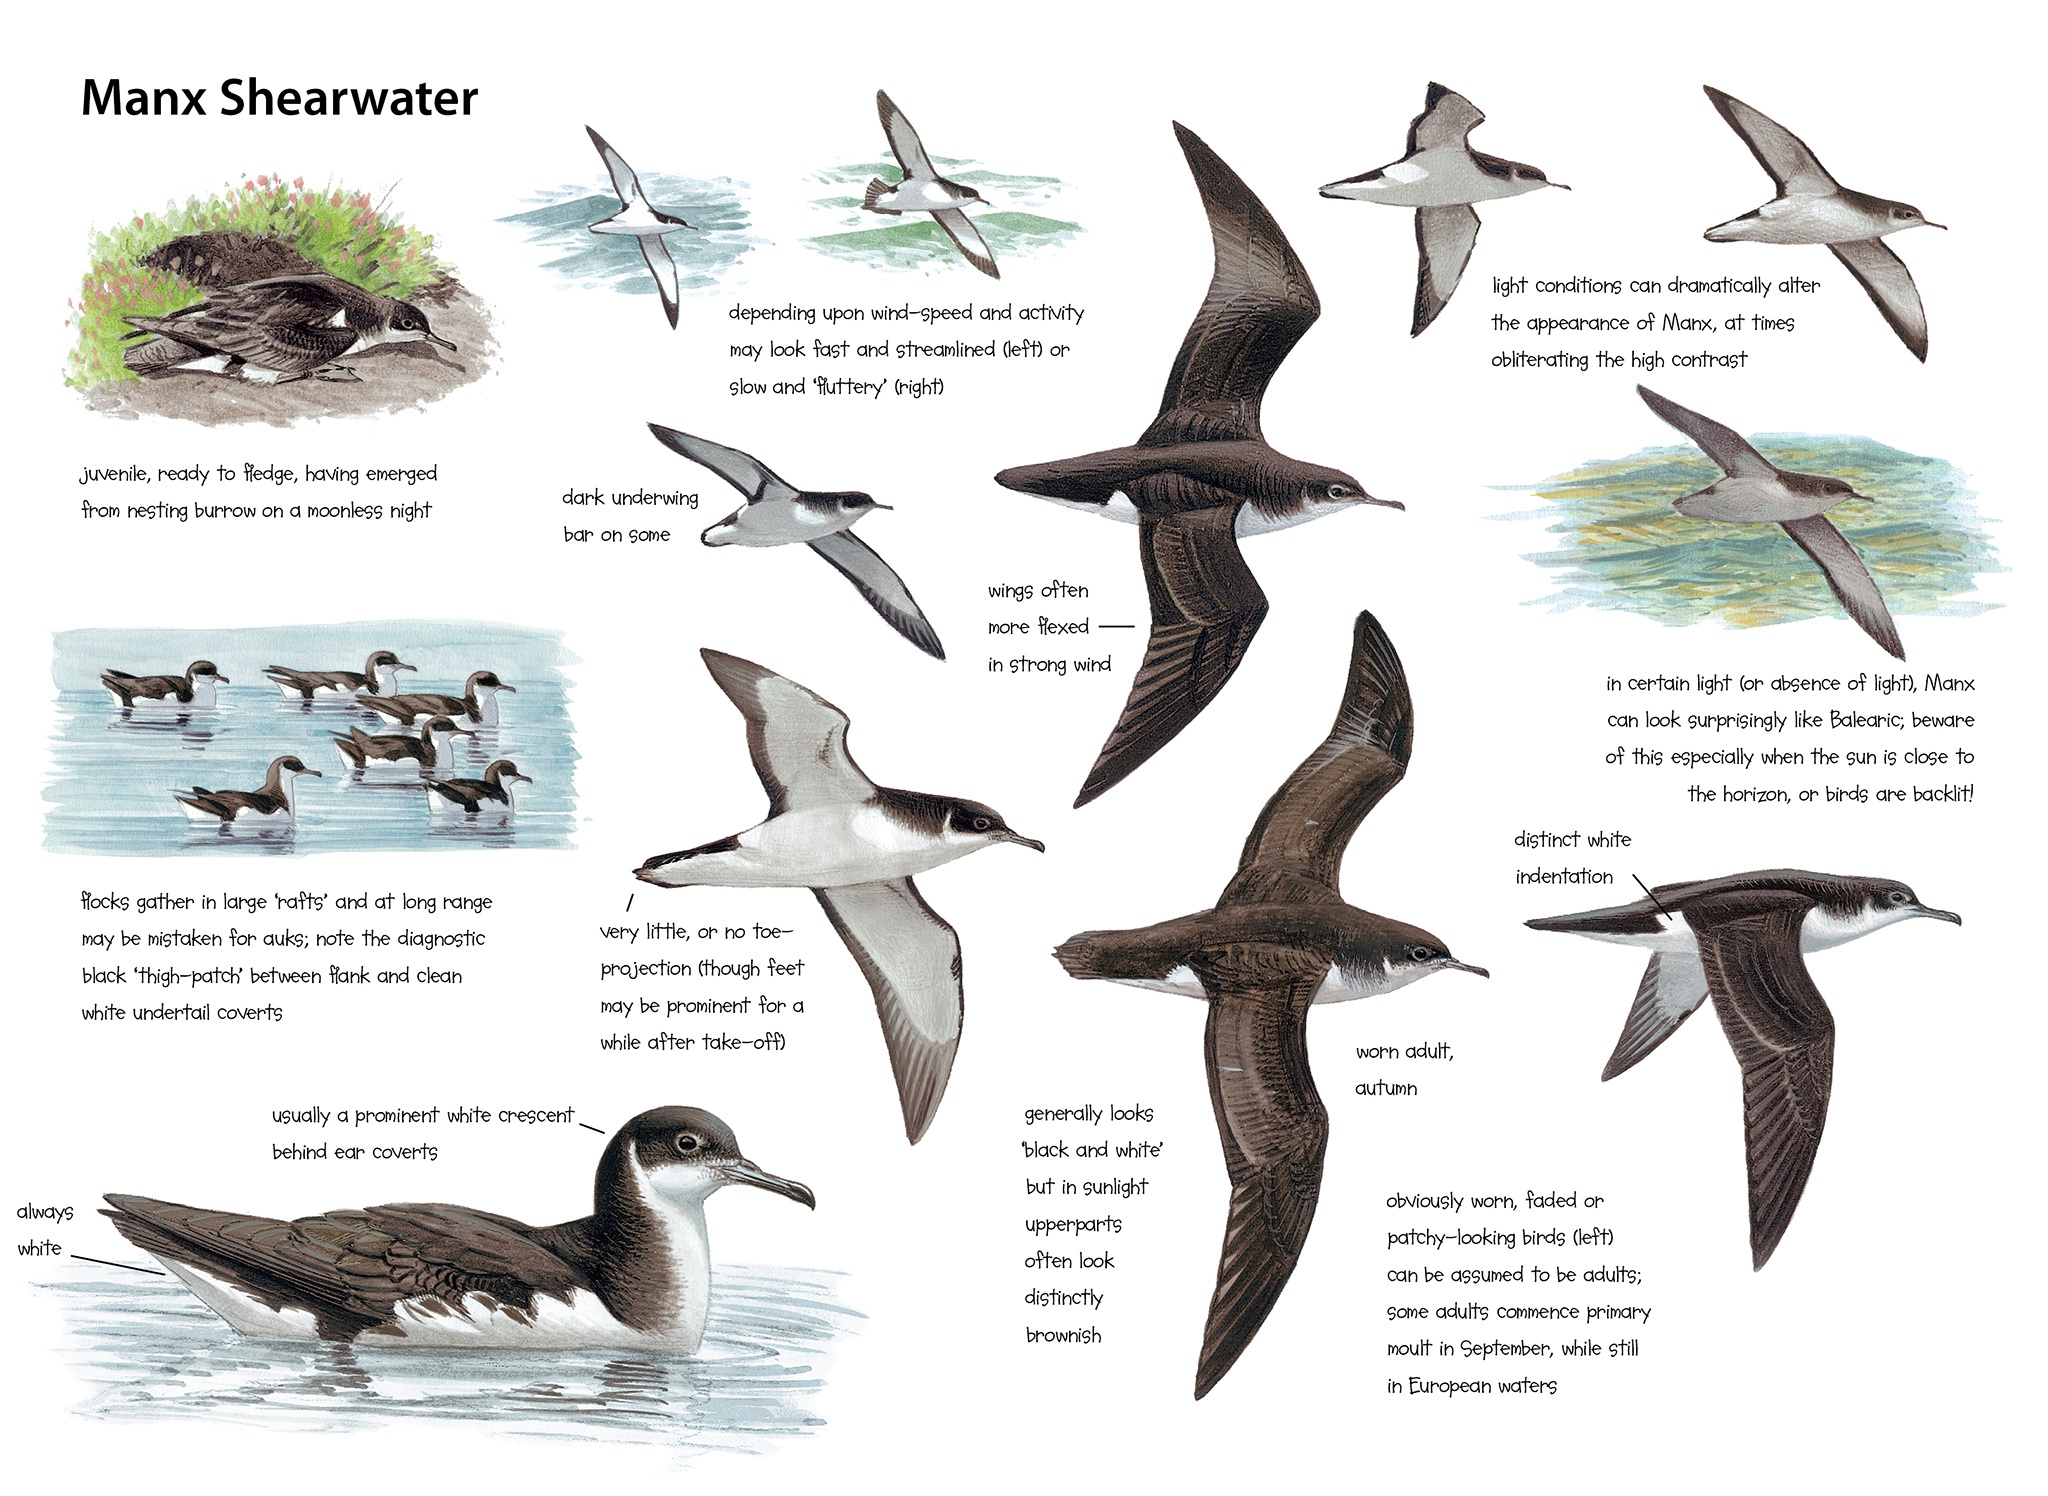 Manx Shearwater - The Sound Approach